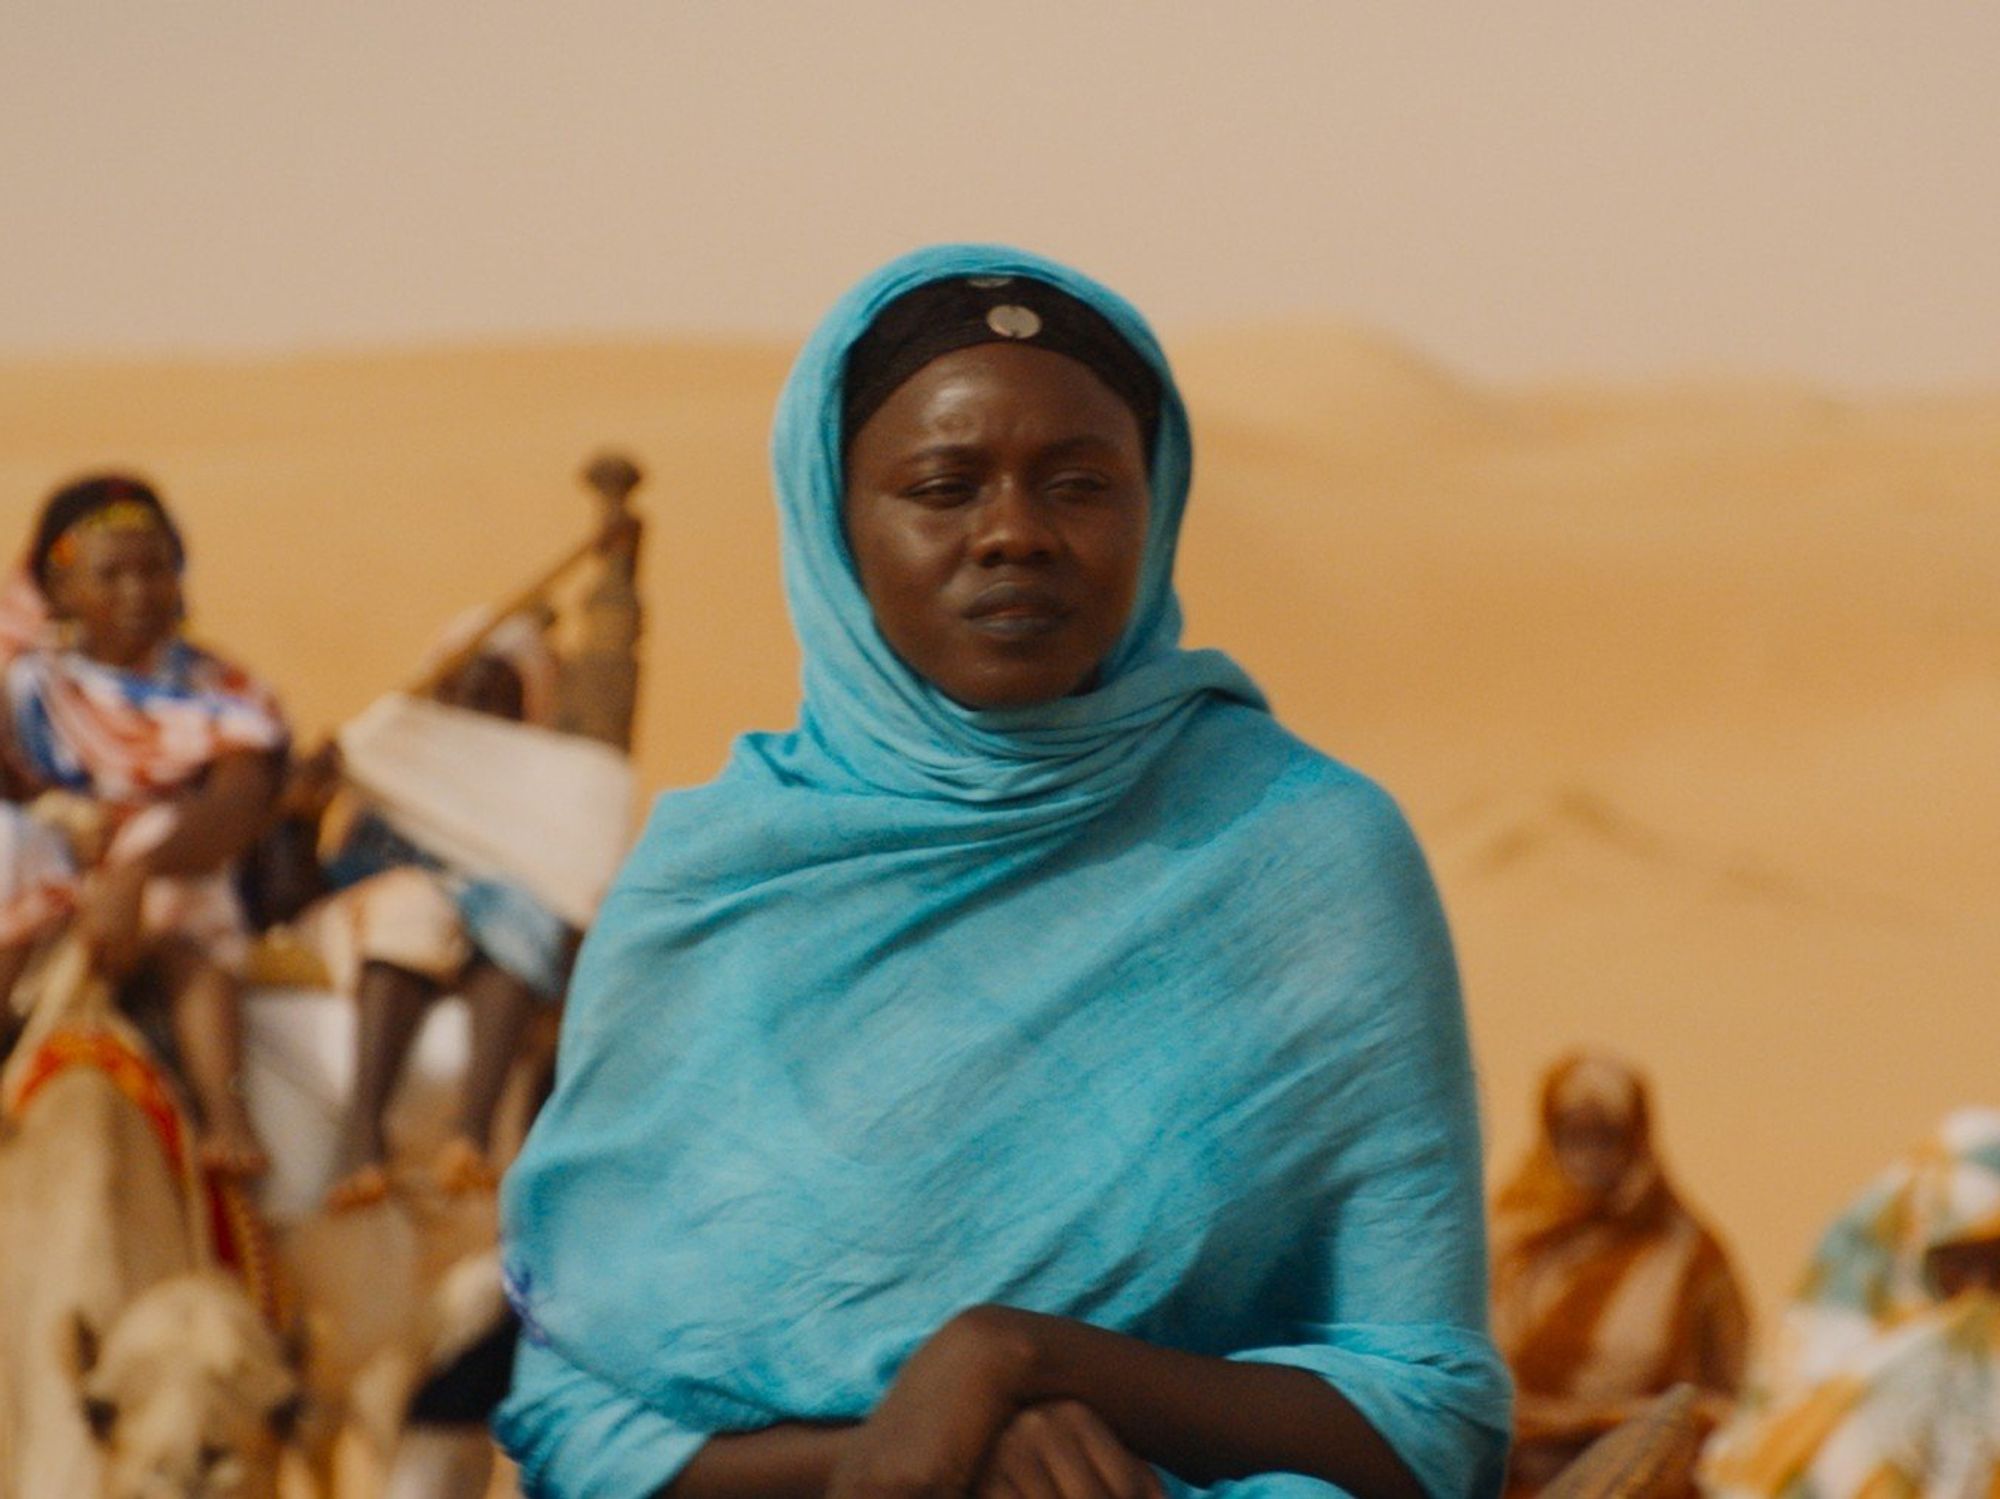 A still image from the film of a woman in the desert in a full headscarf looking pensive. 